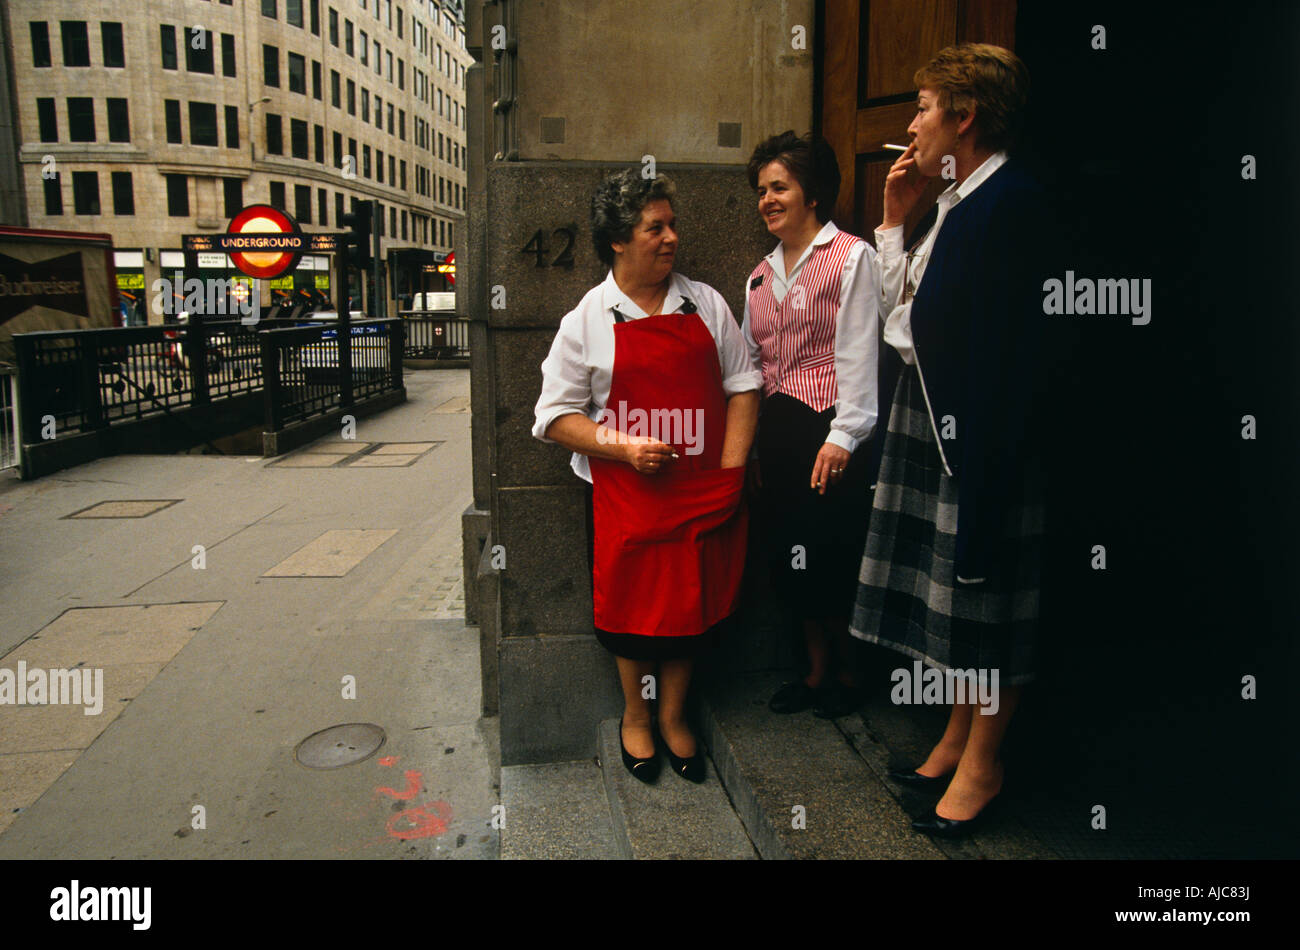 Middle-aged women office workers take a cigarette break outside their place of work in the City of London. Stock Photo